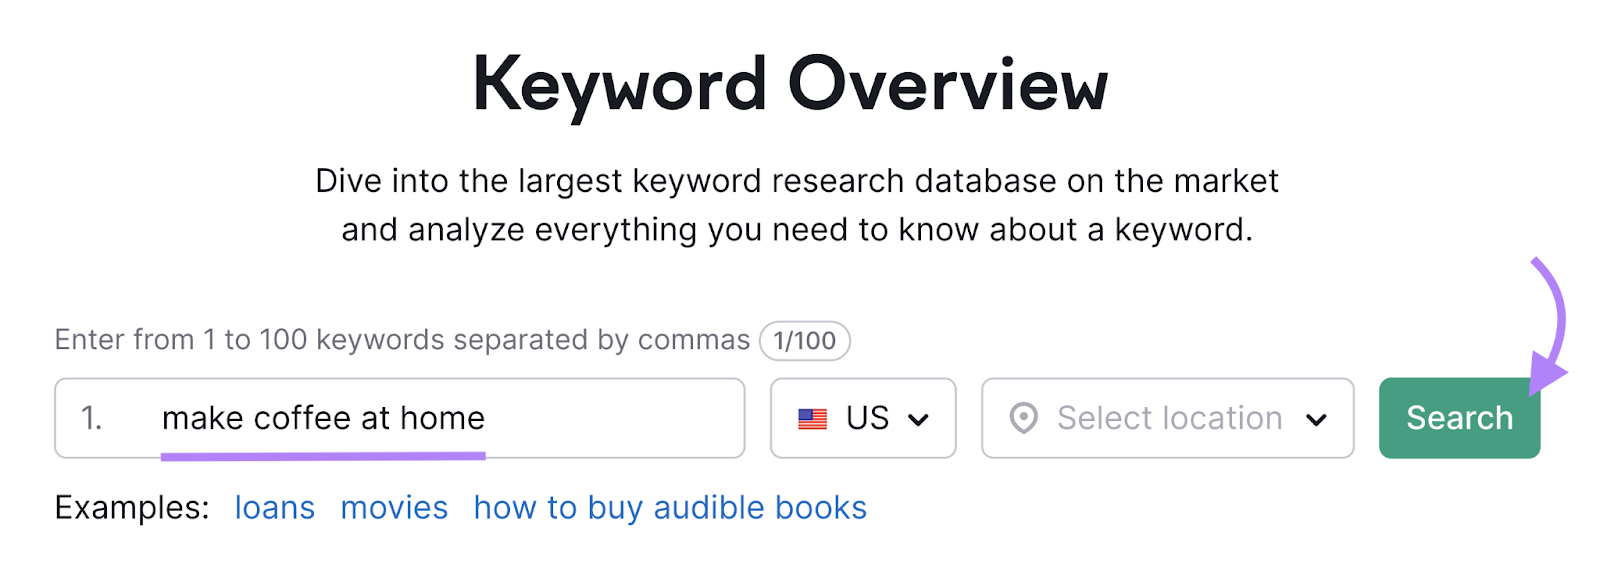 Keyword Overview tool search for "make coffee at home"